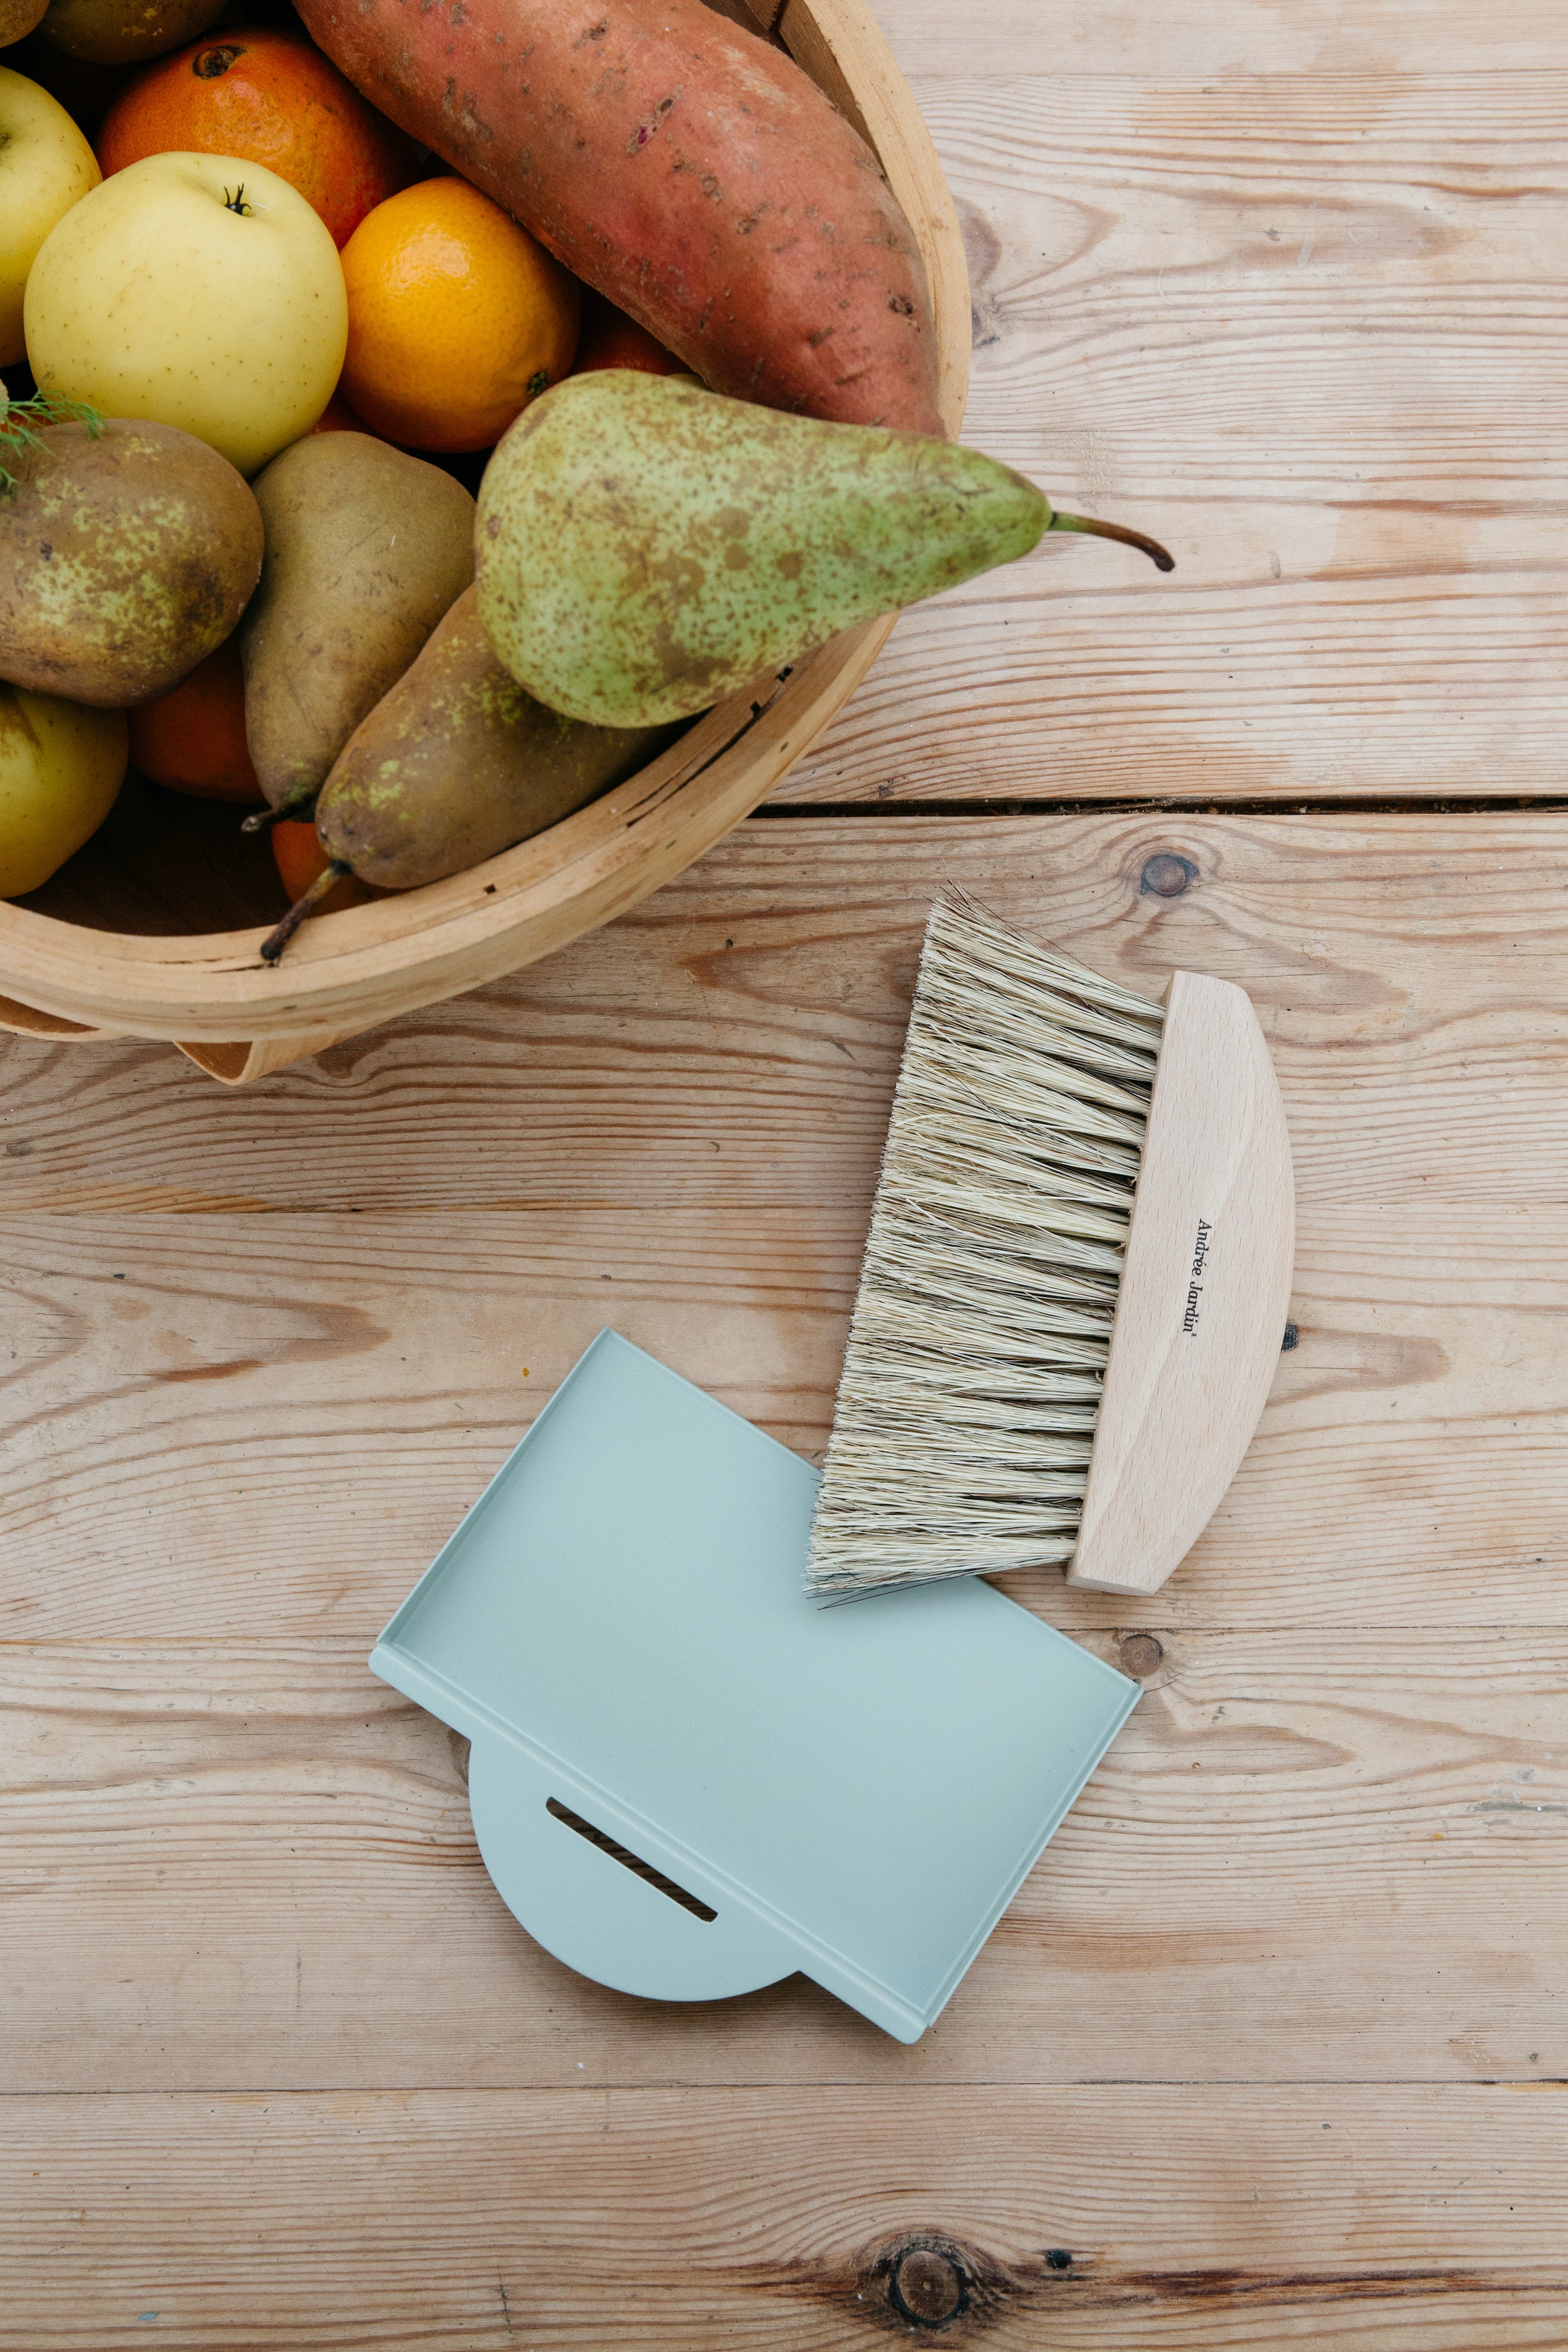 Andrée Jardin Mr. and Mrs. Clynk Natural Table Brush and Dustpan Set Utilities Andrée Jardin Back in stock Brand_Andrée Jardin Home_Broom Sets Home_Household Cleaning New Arrivals coffret-ramasse-miettes-table-clynk-nature-3166-2AndreeJardinMr.andMrs.ClynkNaturalTableBrushandGreyGreenDustpanSet_116a8ae9-bdaf-4a29-a2de-2d88df0671df